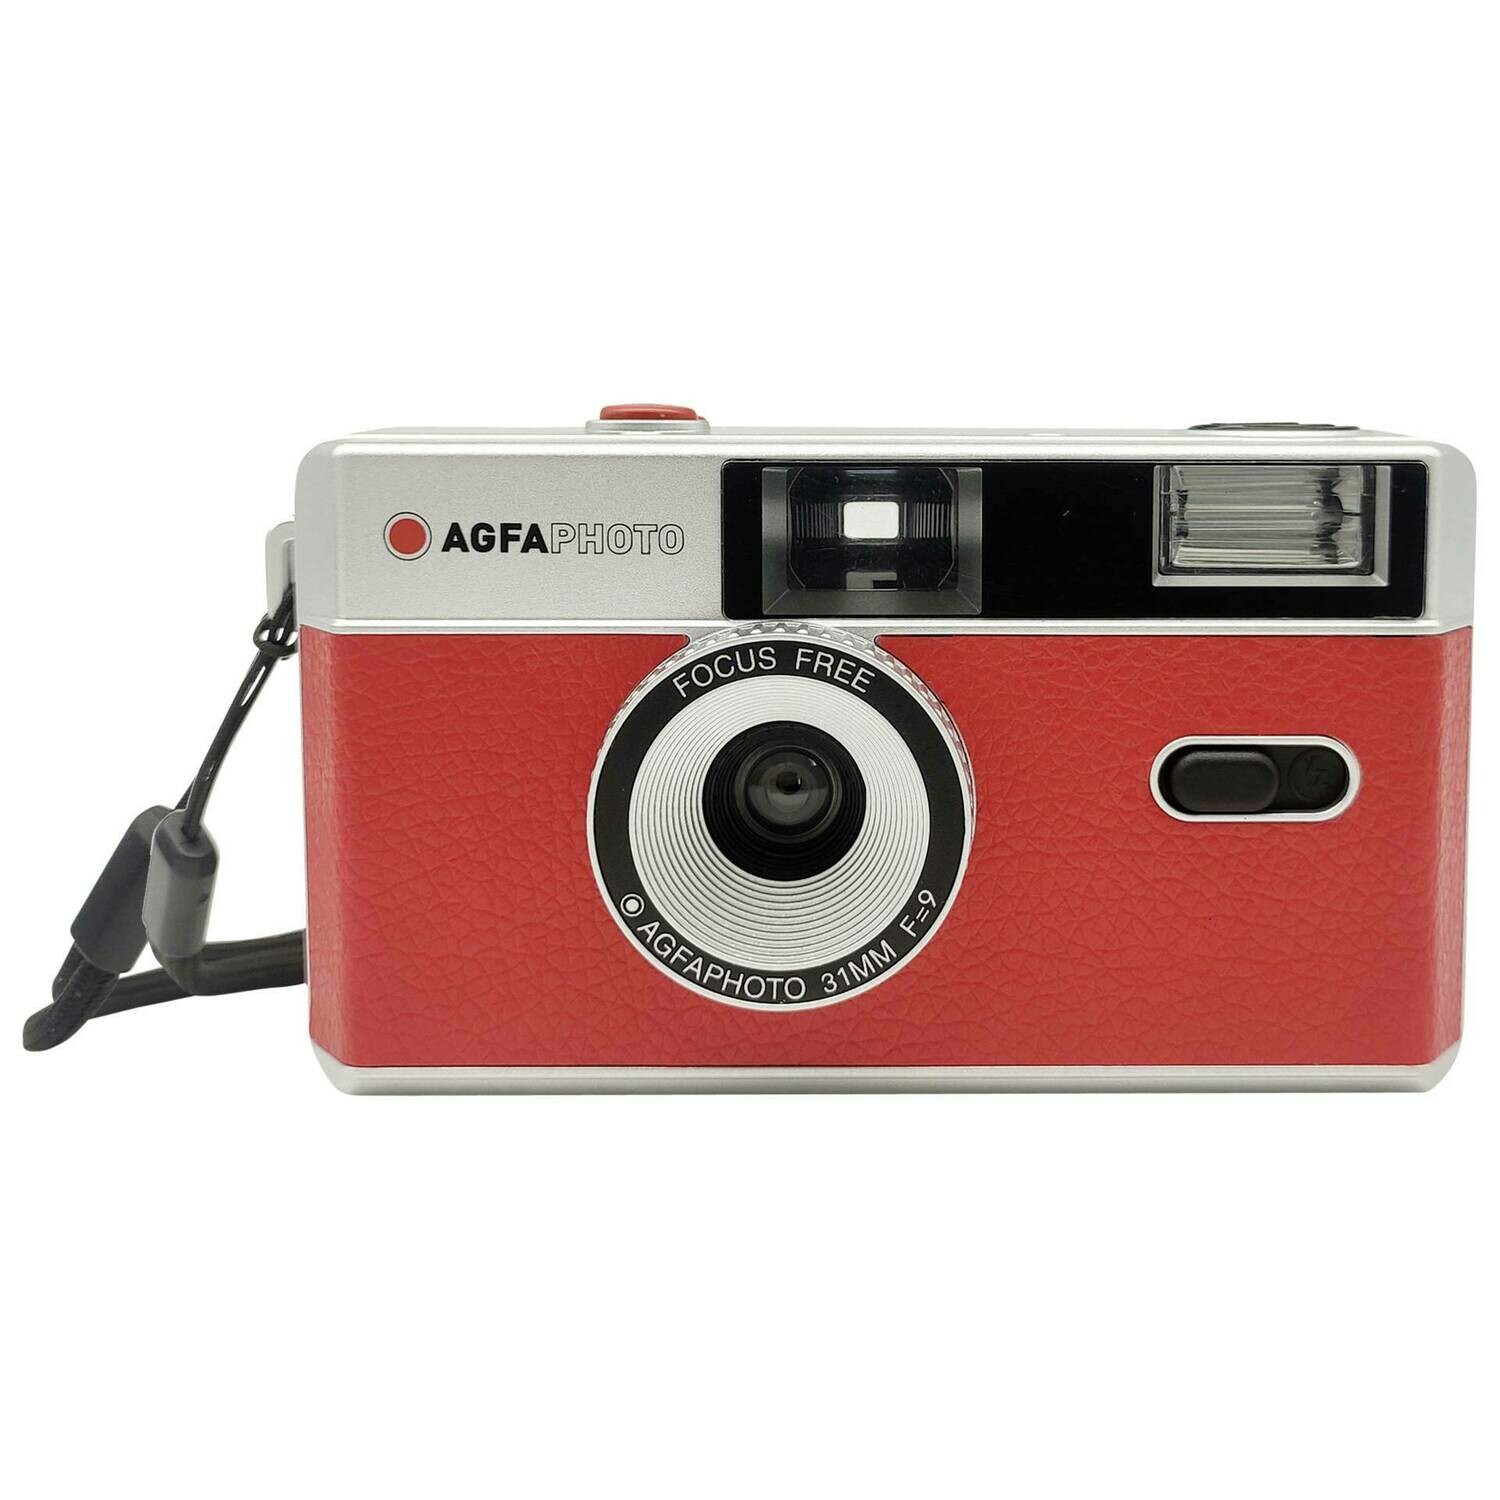 Agfaphoto Reusable Photo Camera 35 mm red